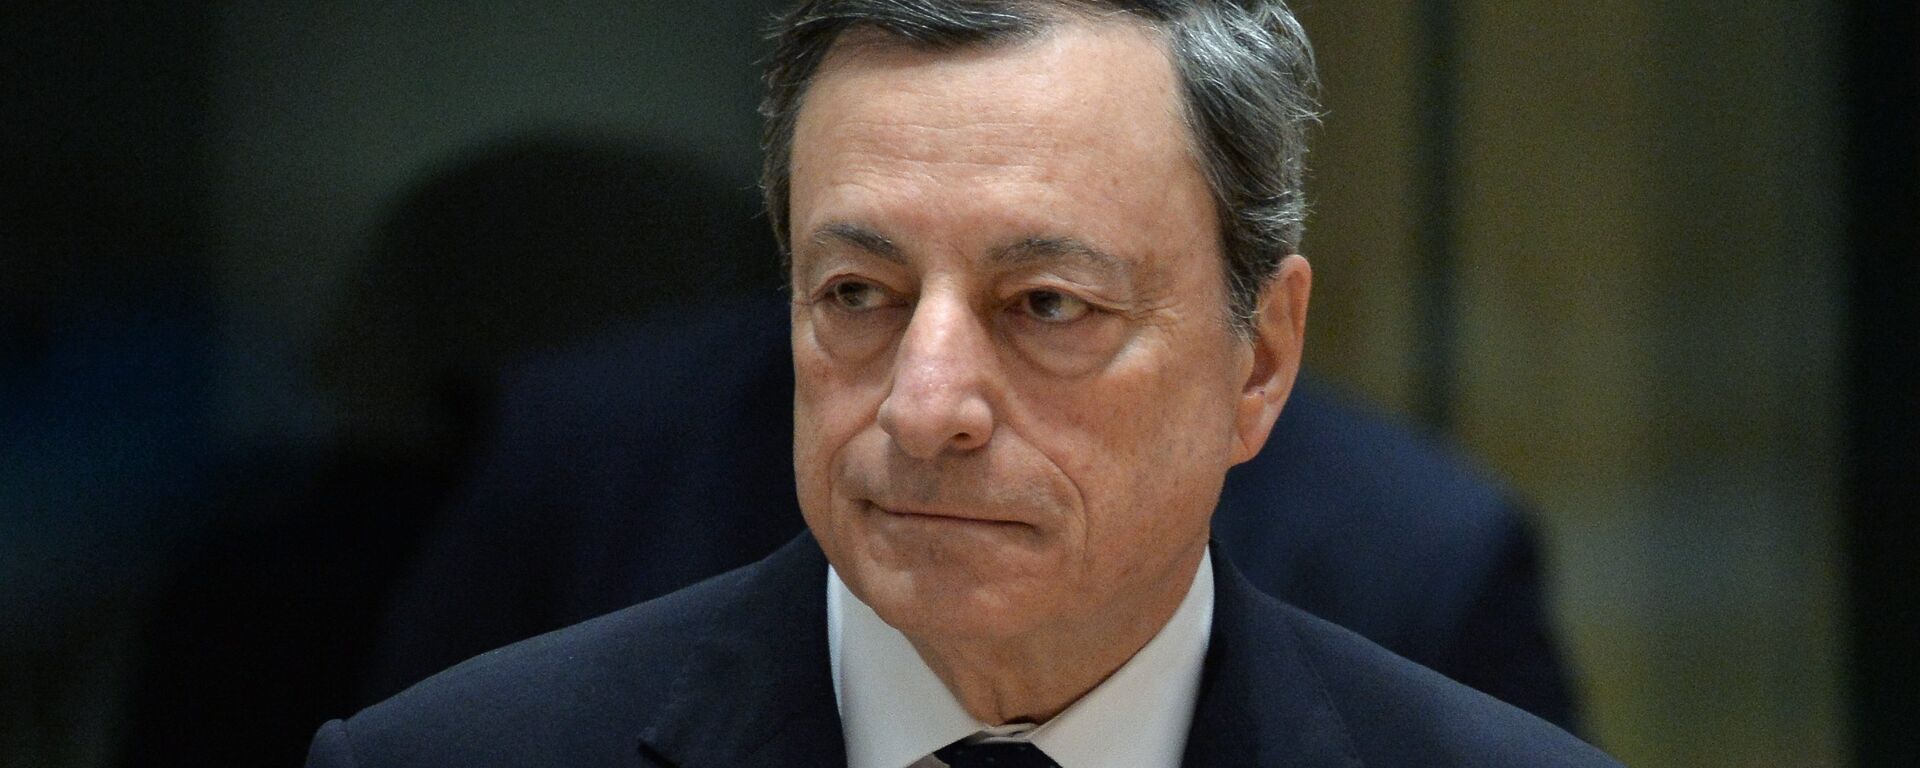 European Central Bank President Mario Draghi is pictured during a EU summit in Brussels - Sputnik International, 1920, 14.07.2022